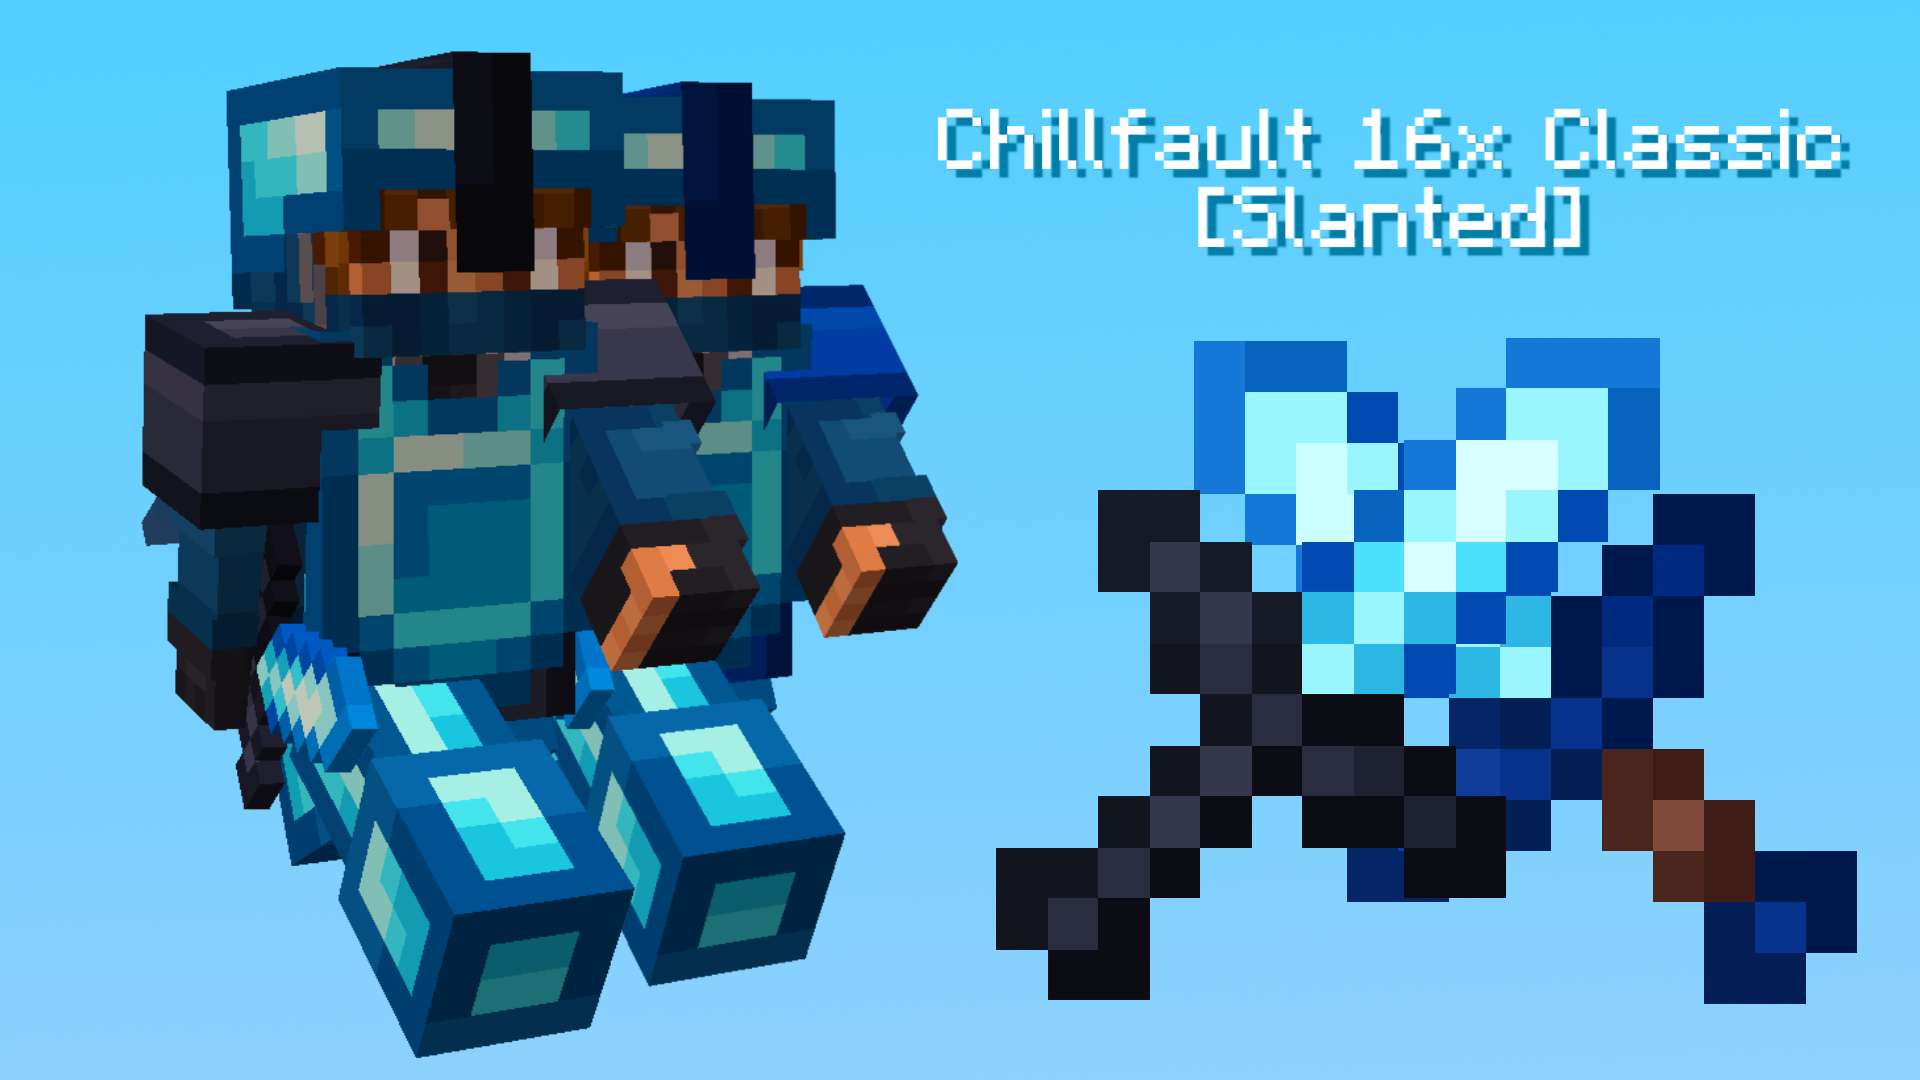 Gallery Banner for Chillfault  Classic [Slanted] on PvPRP